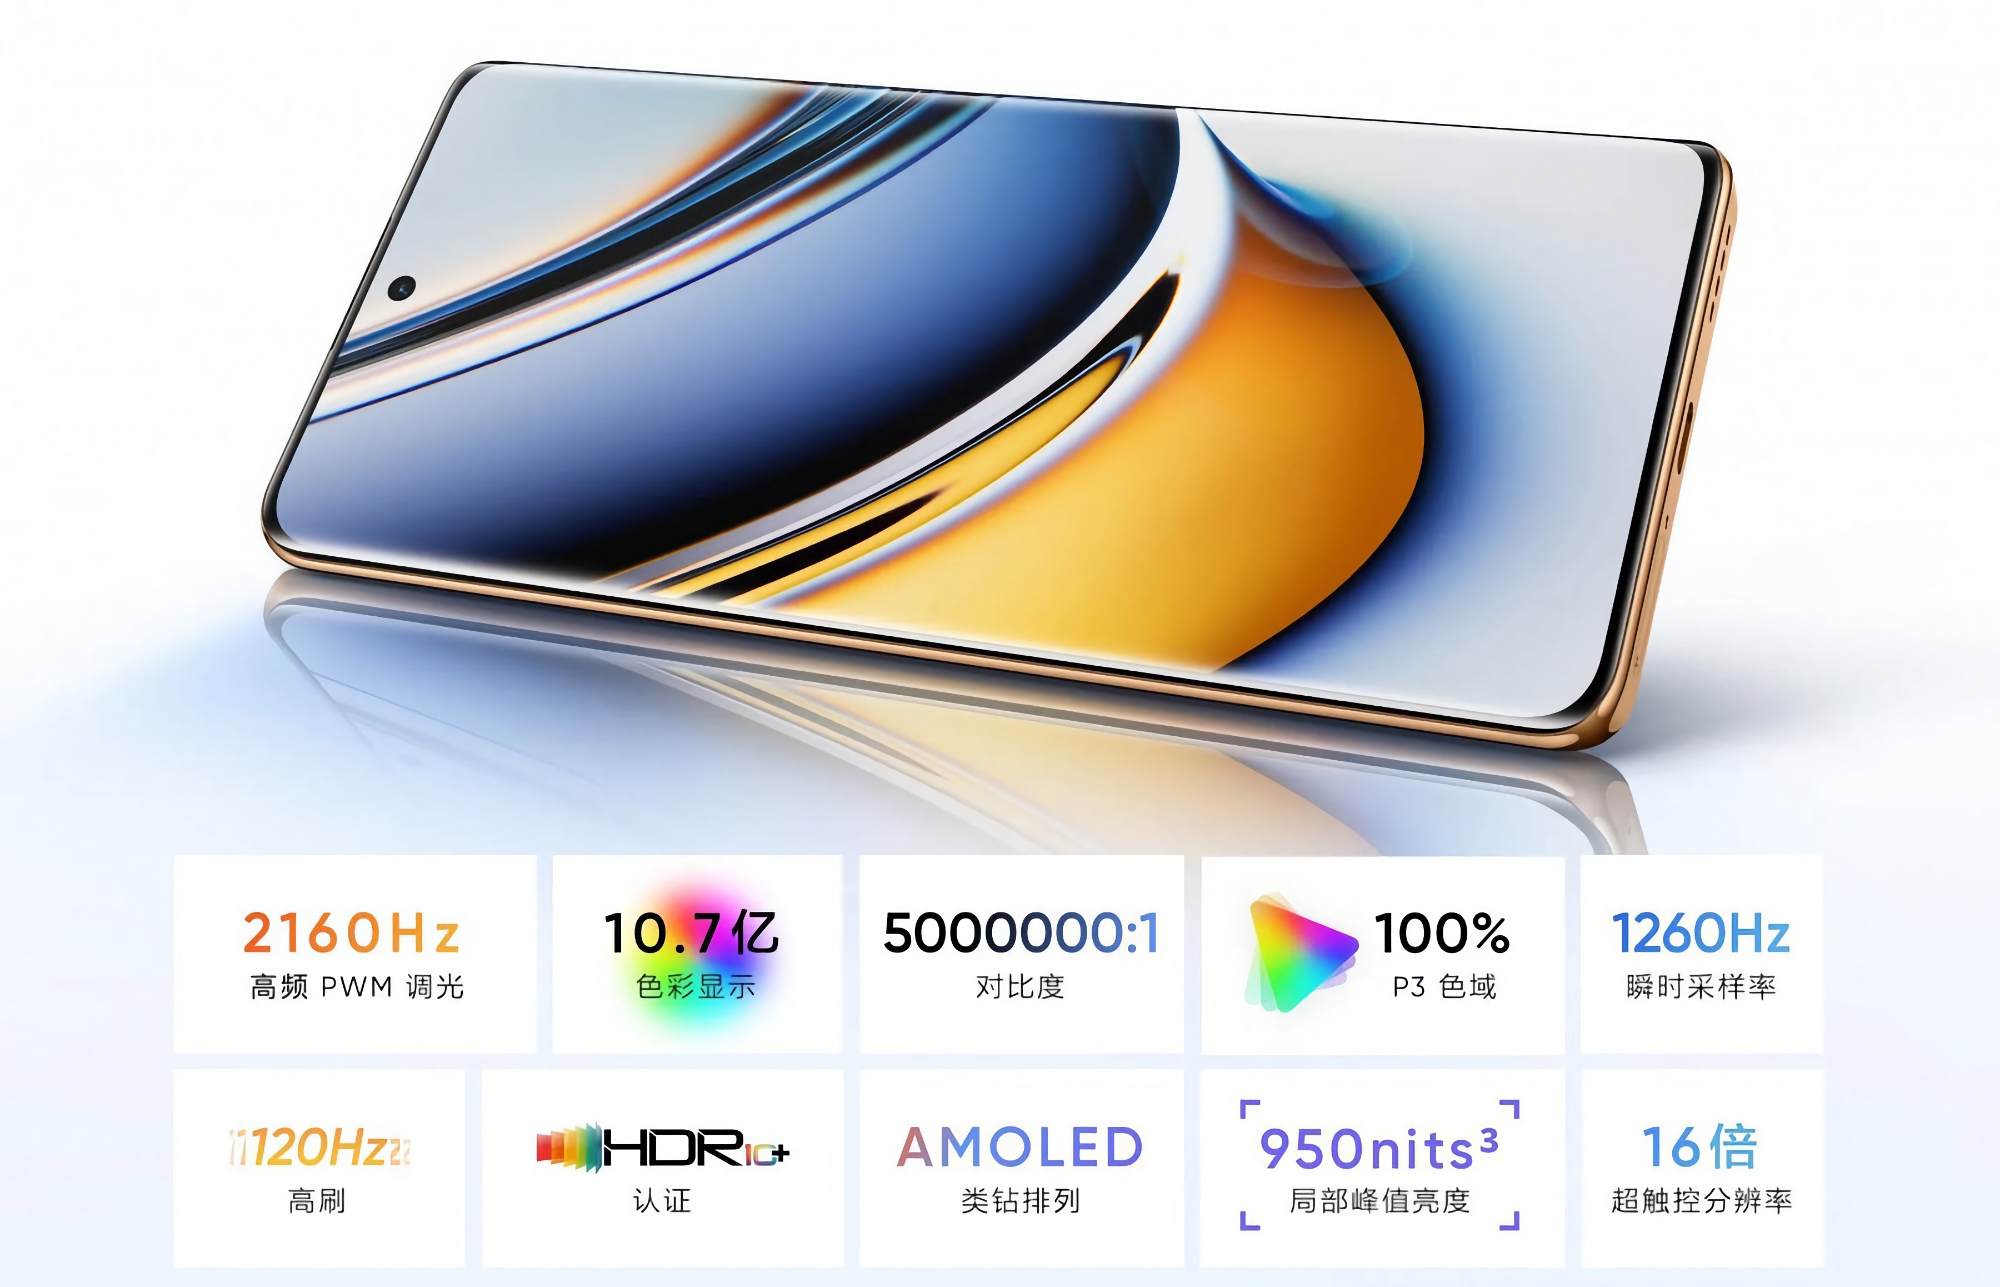 Realme 11 Pro with 120 Hz curved display & 100 MP OIS Camera